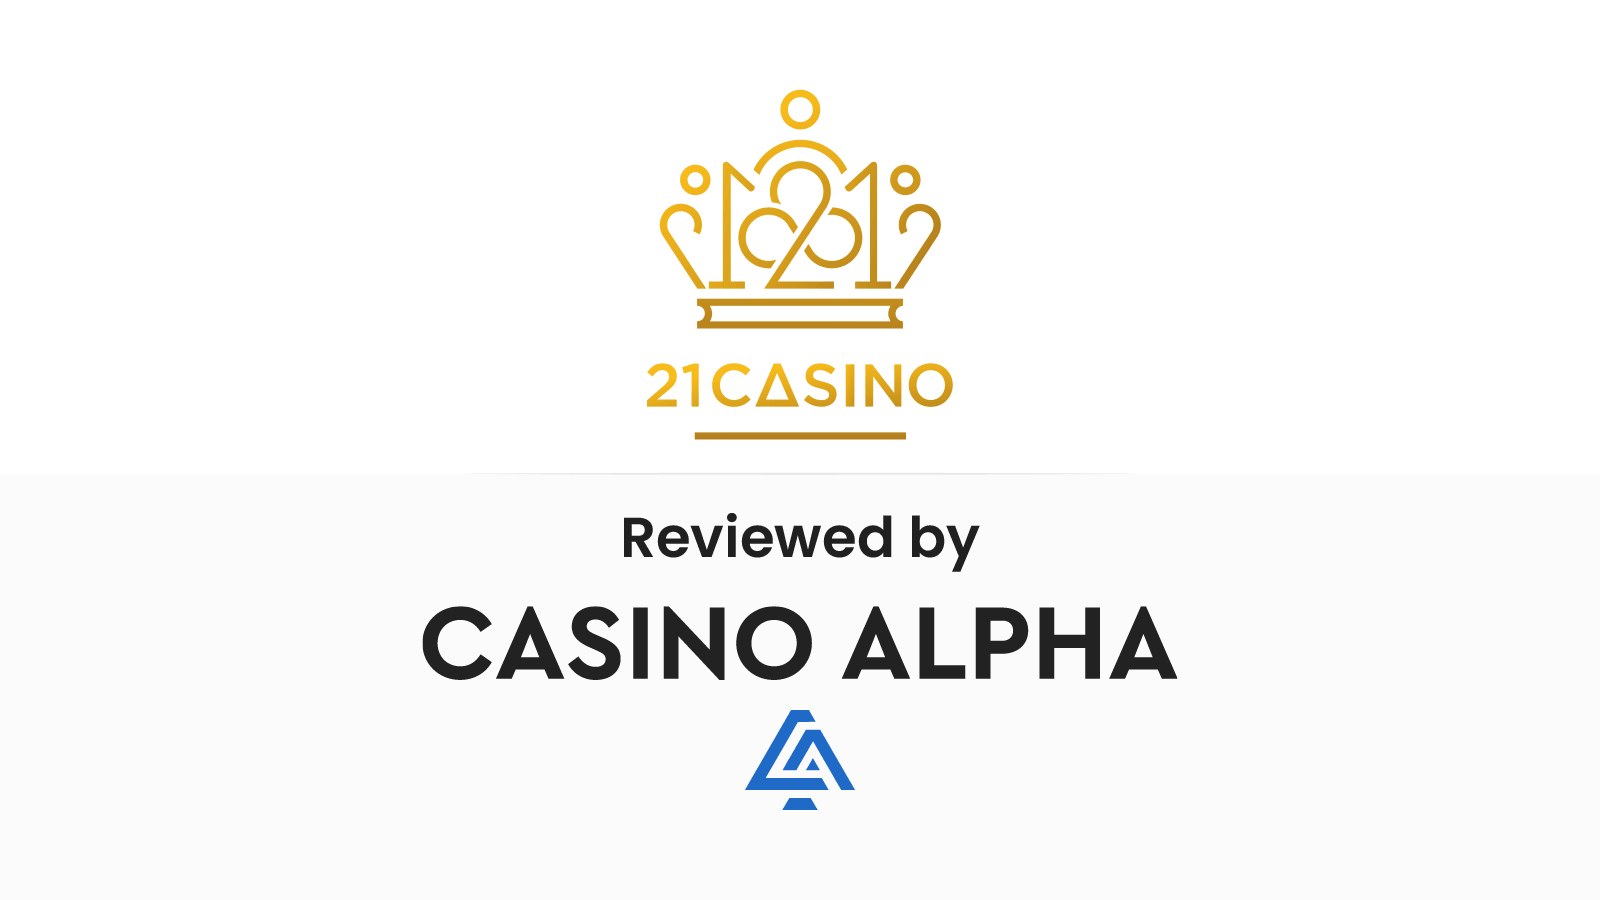 21 Casino Review & Promotions List